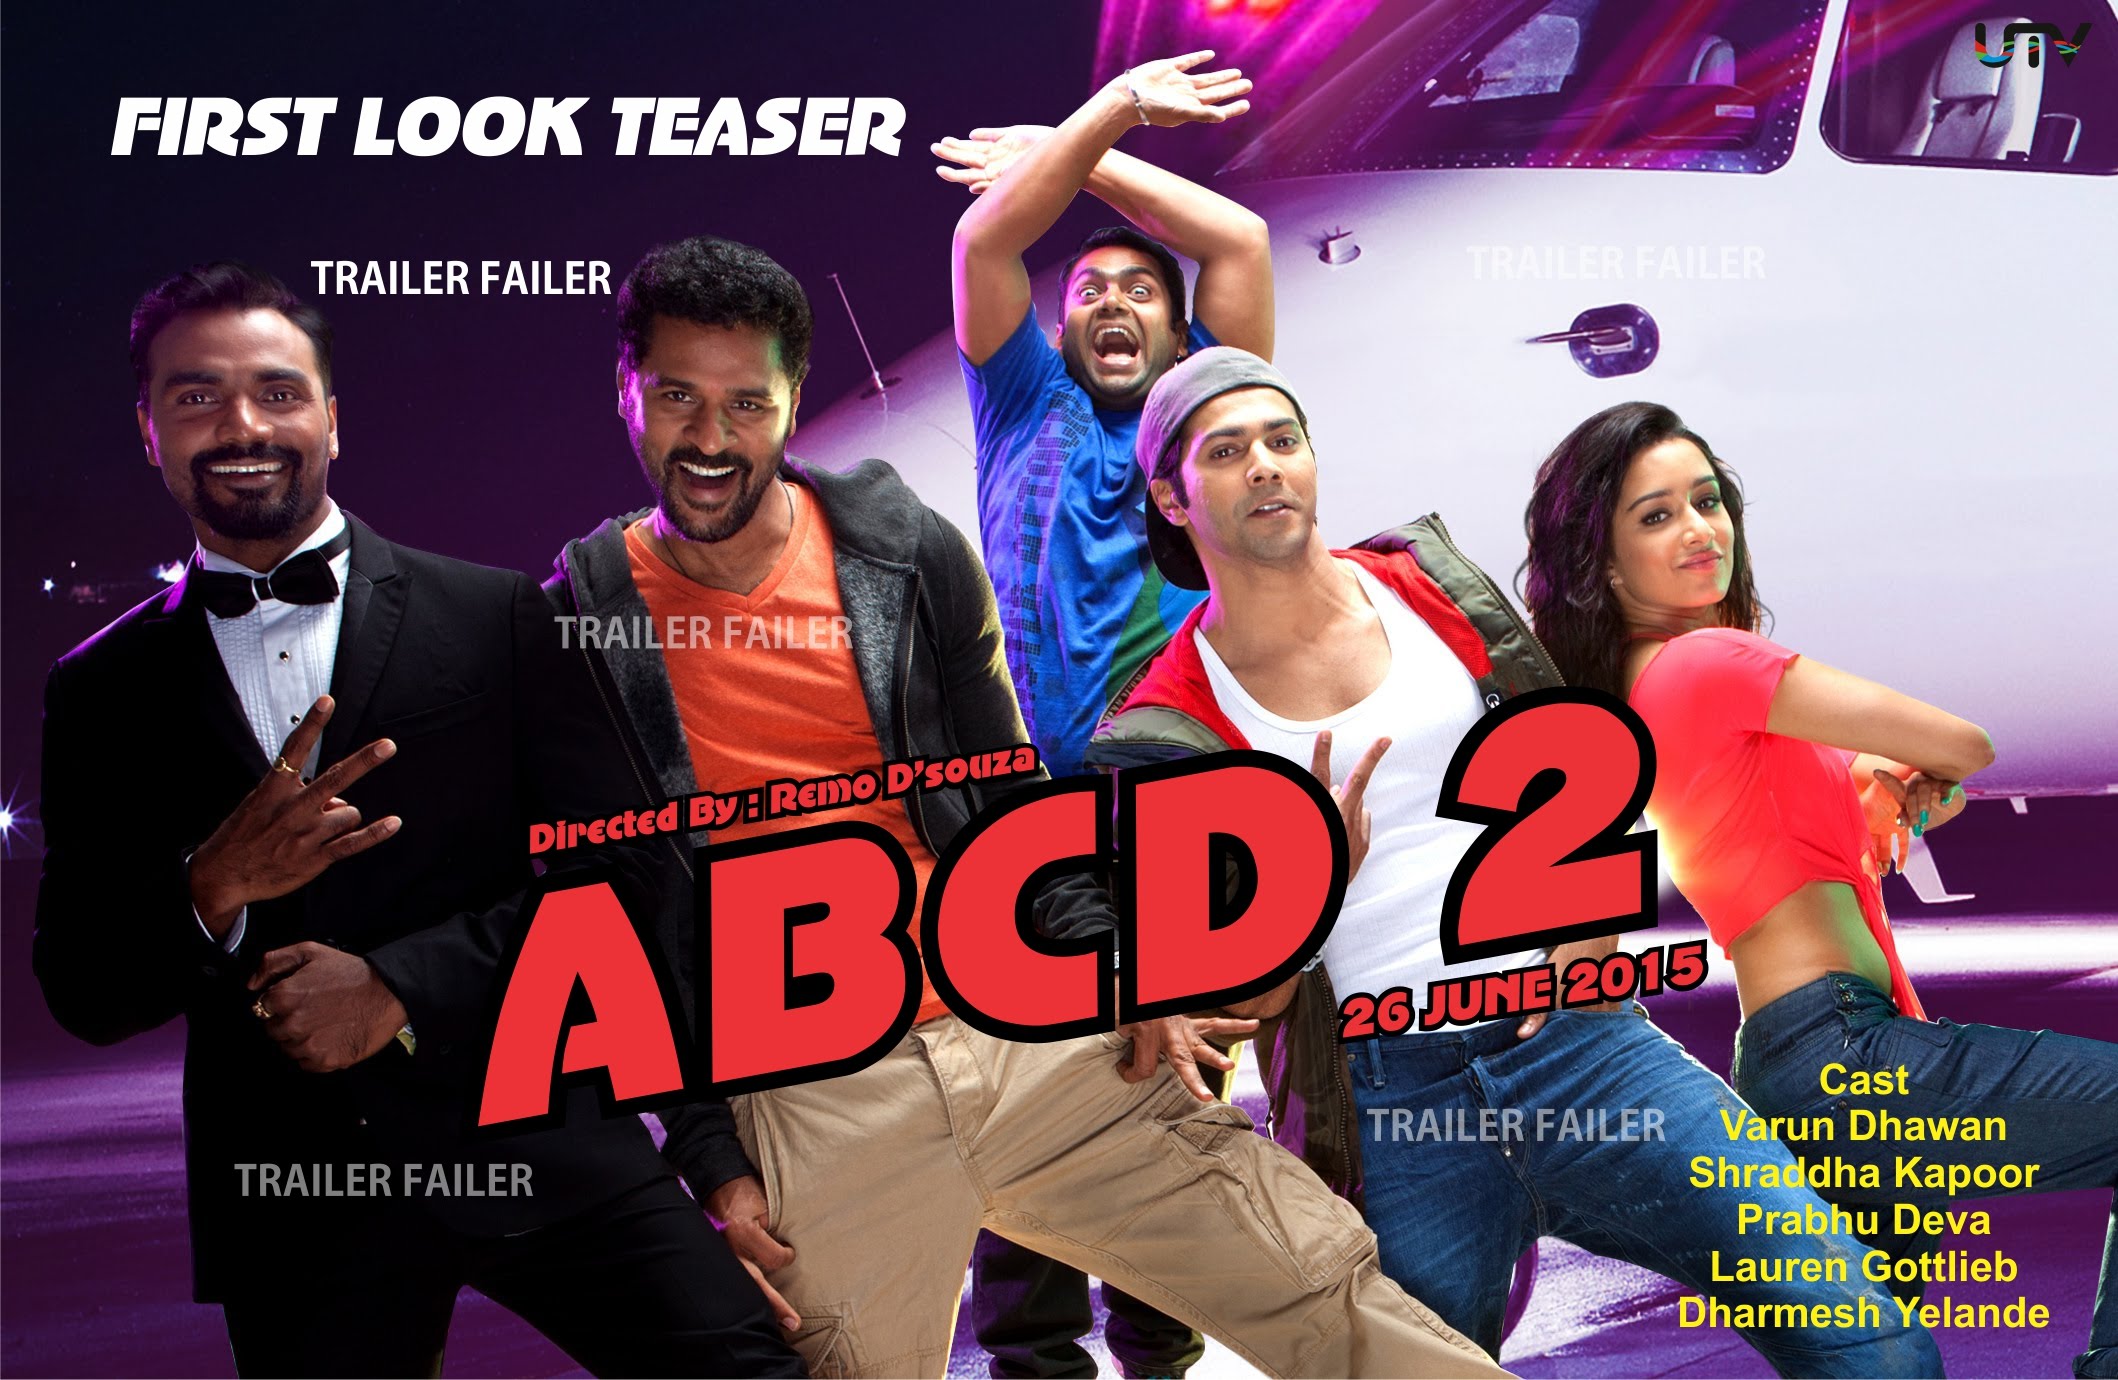 Abcd 2 film download